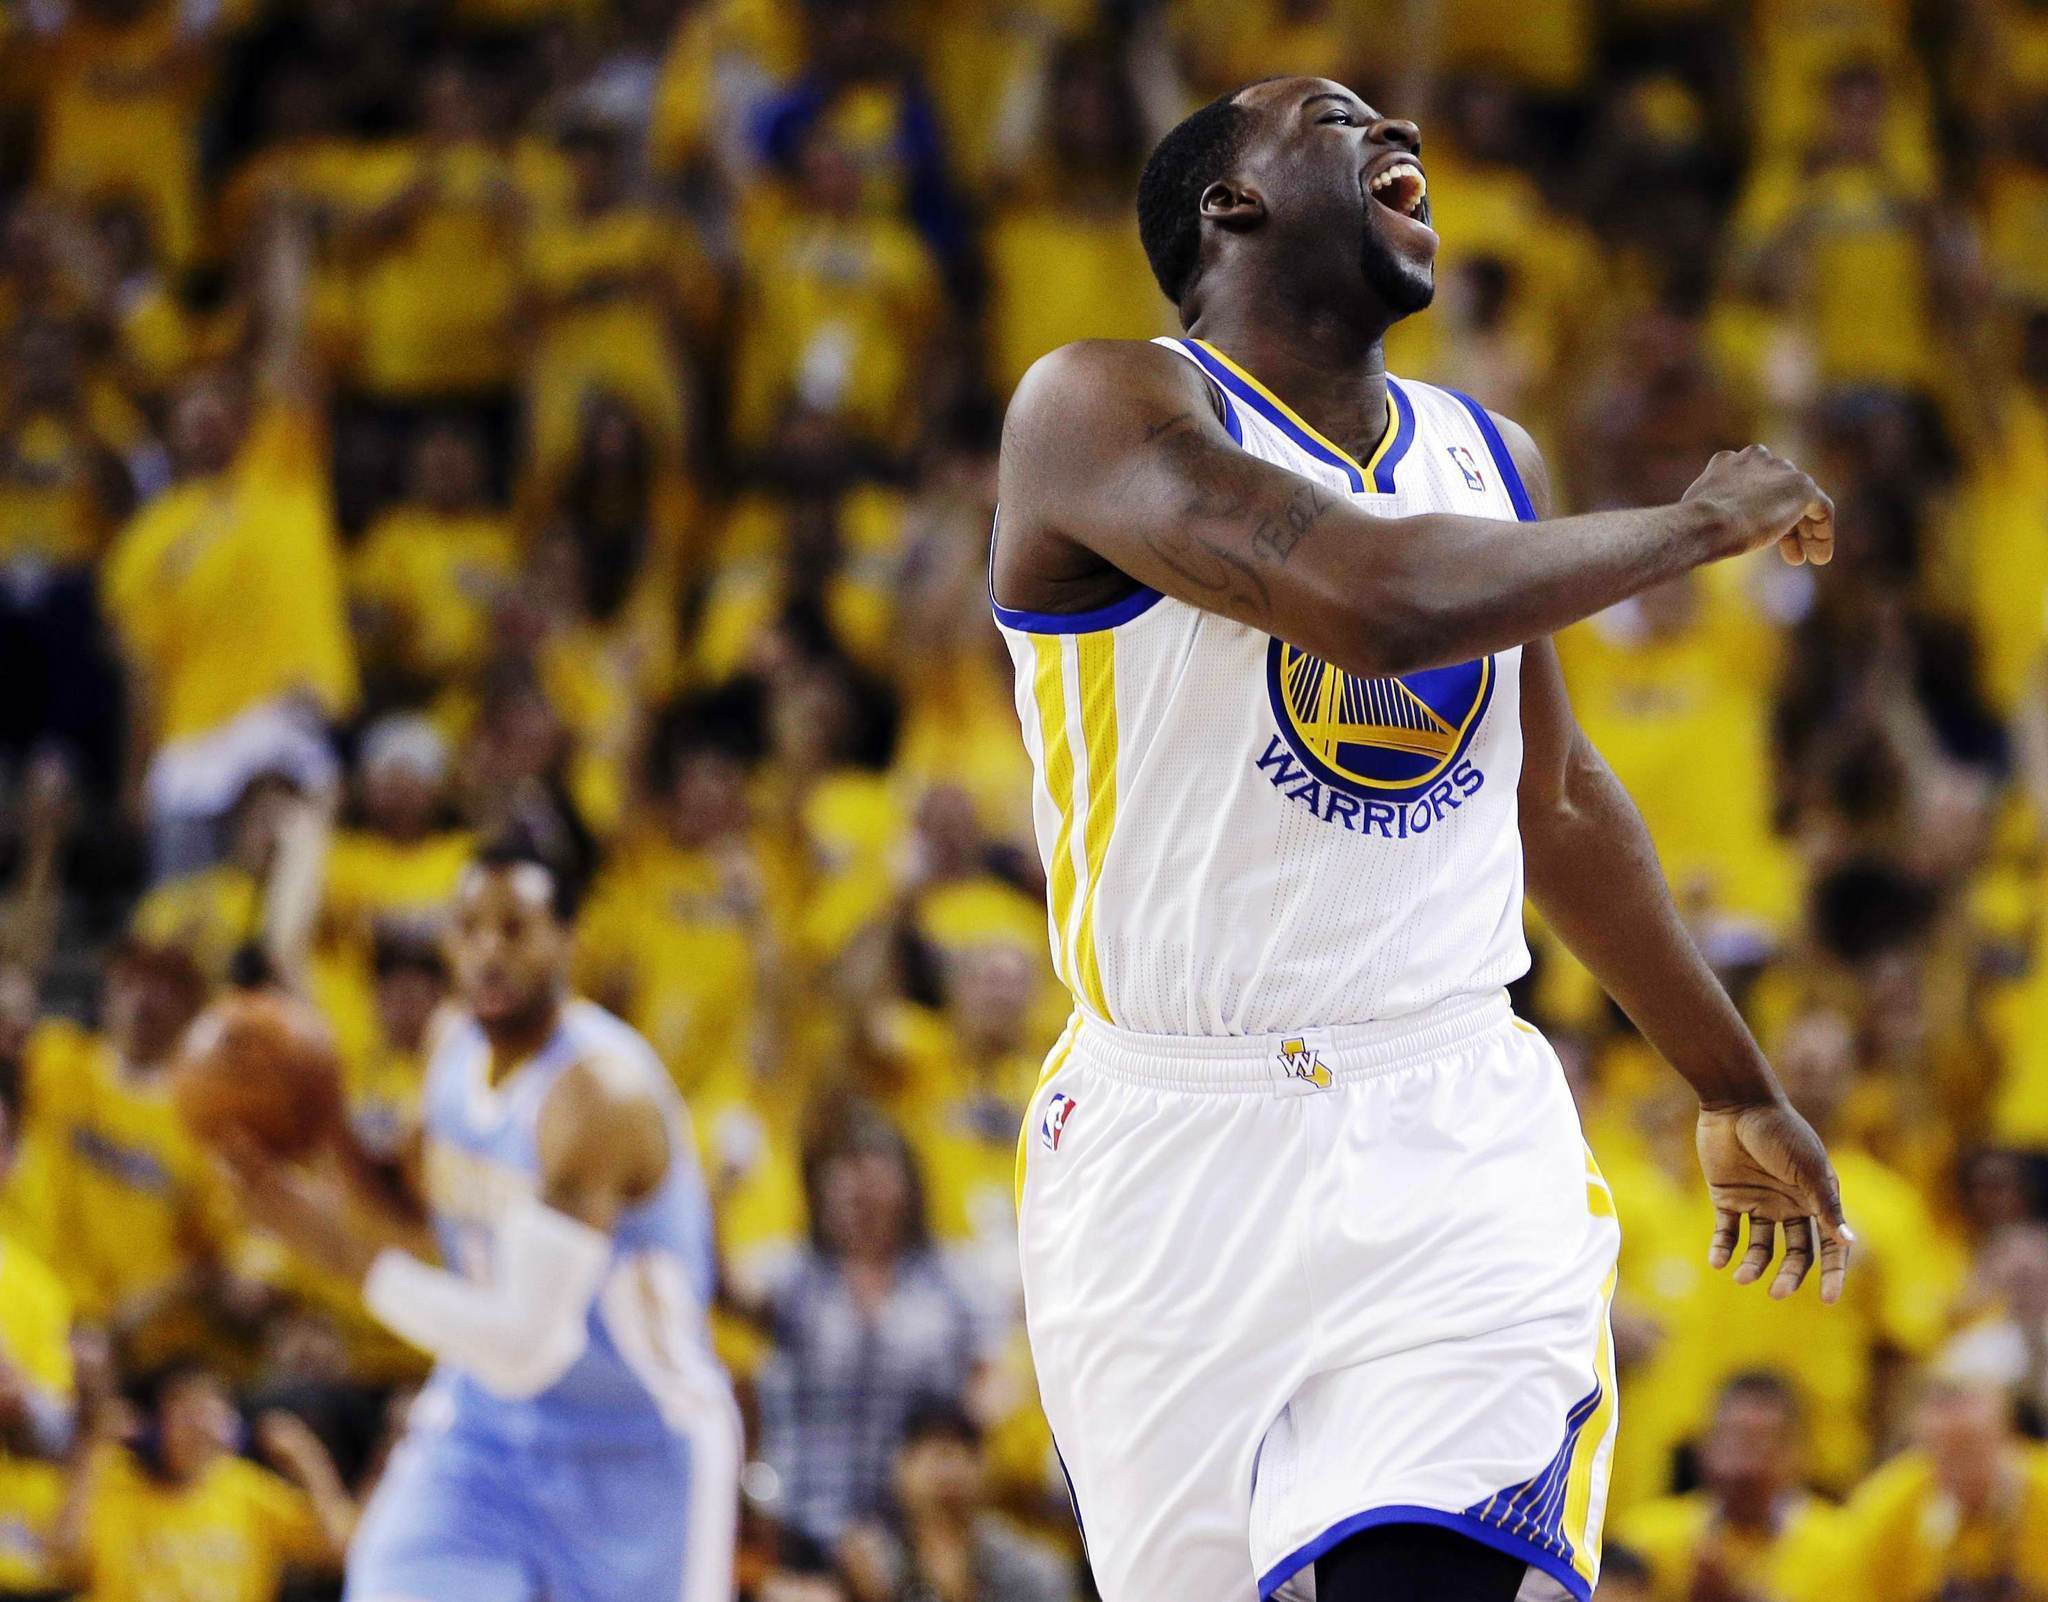 Draymond Green scores gives Golden State Warriors boost in win